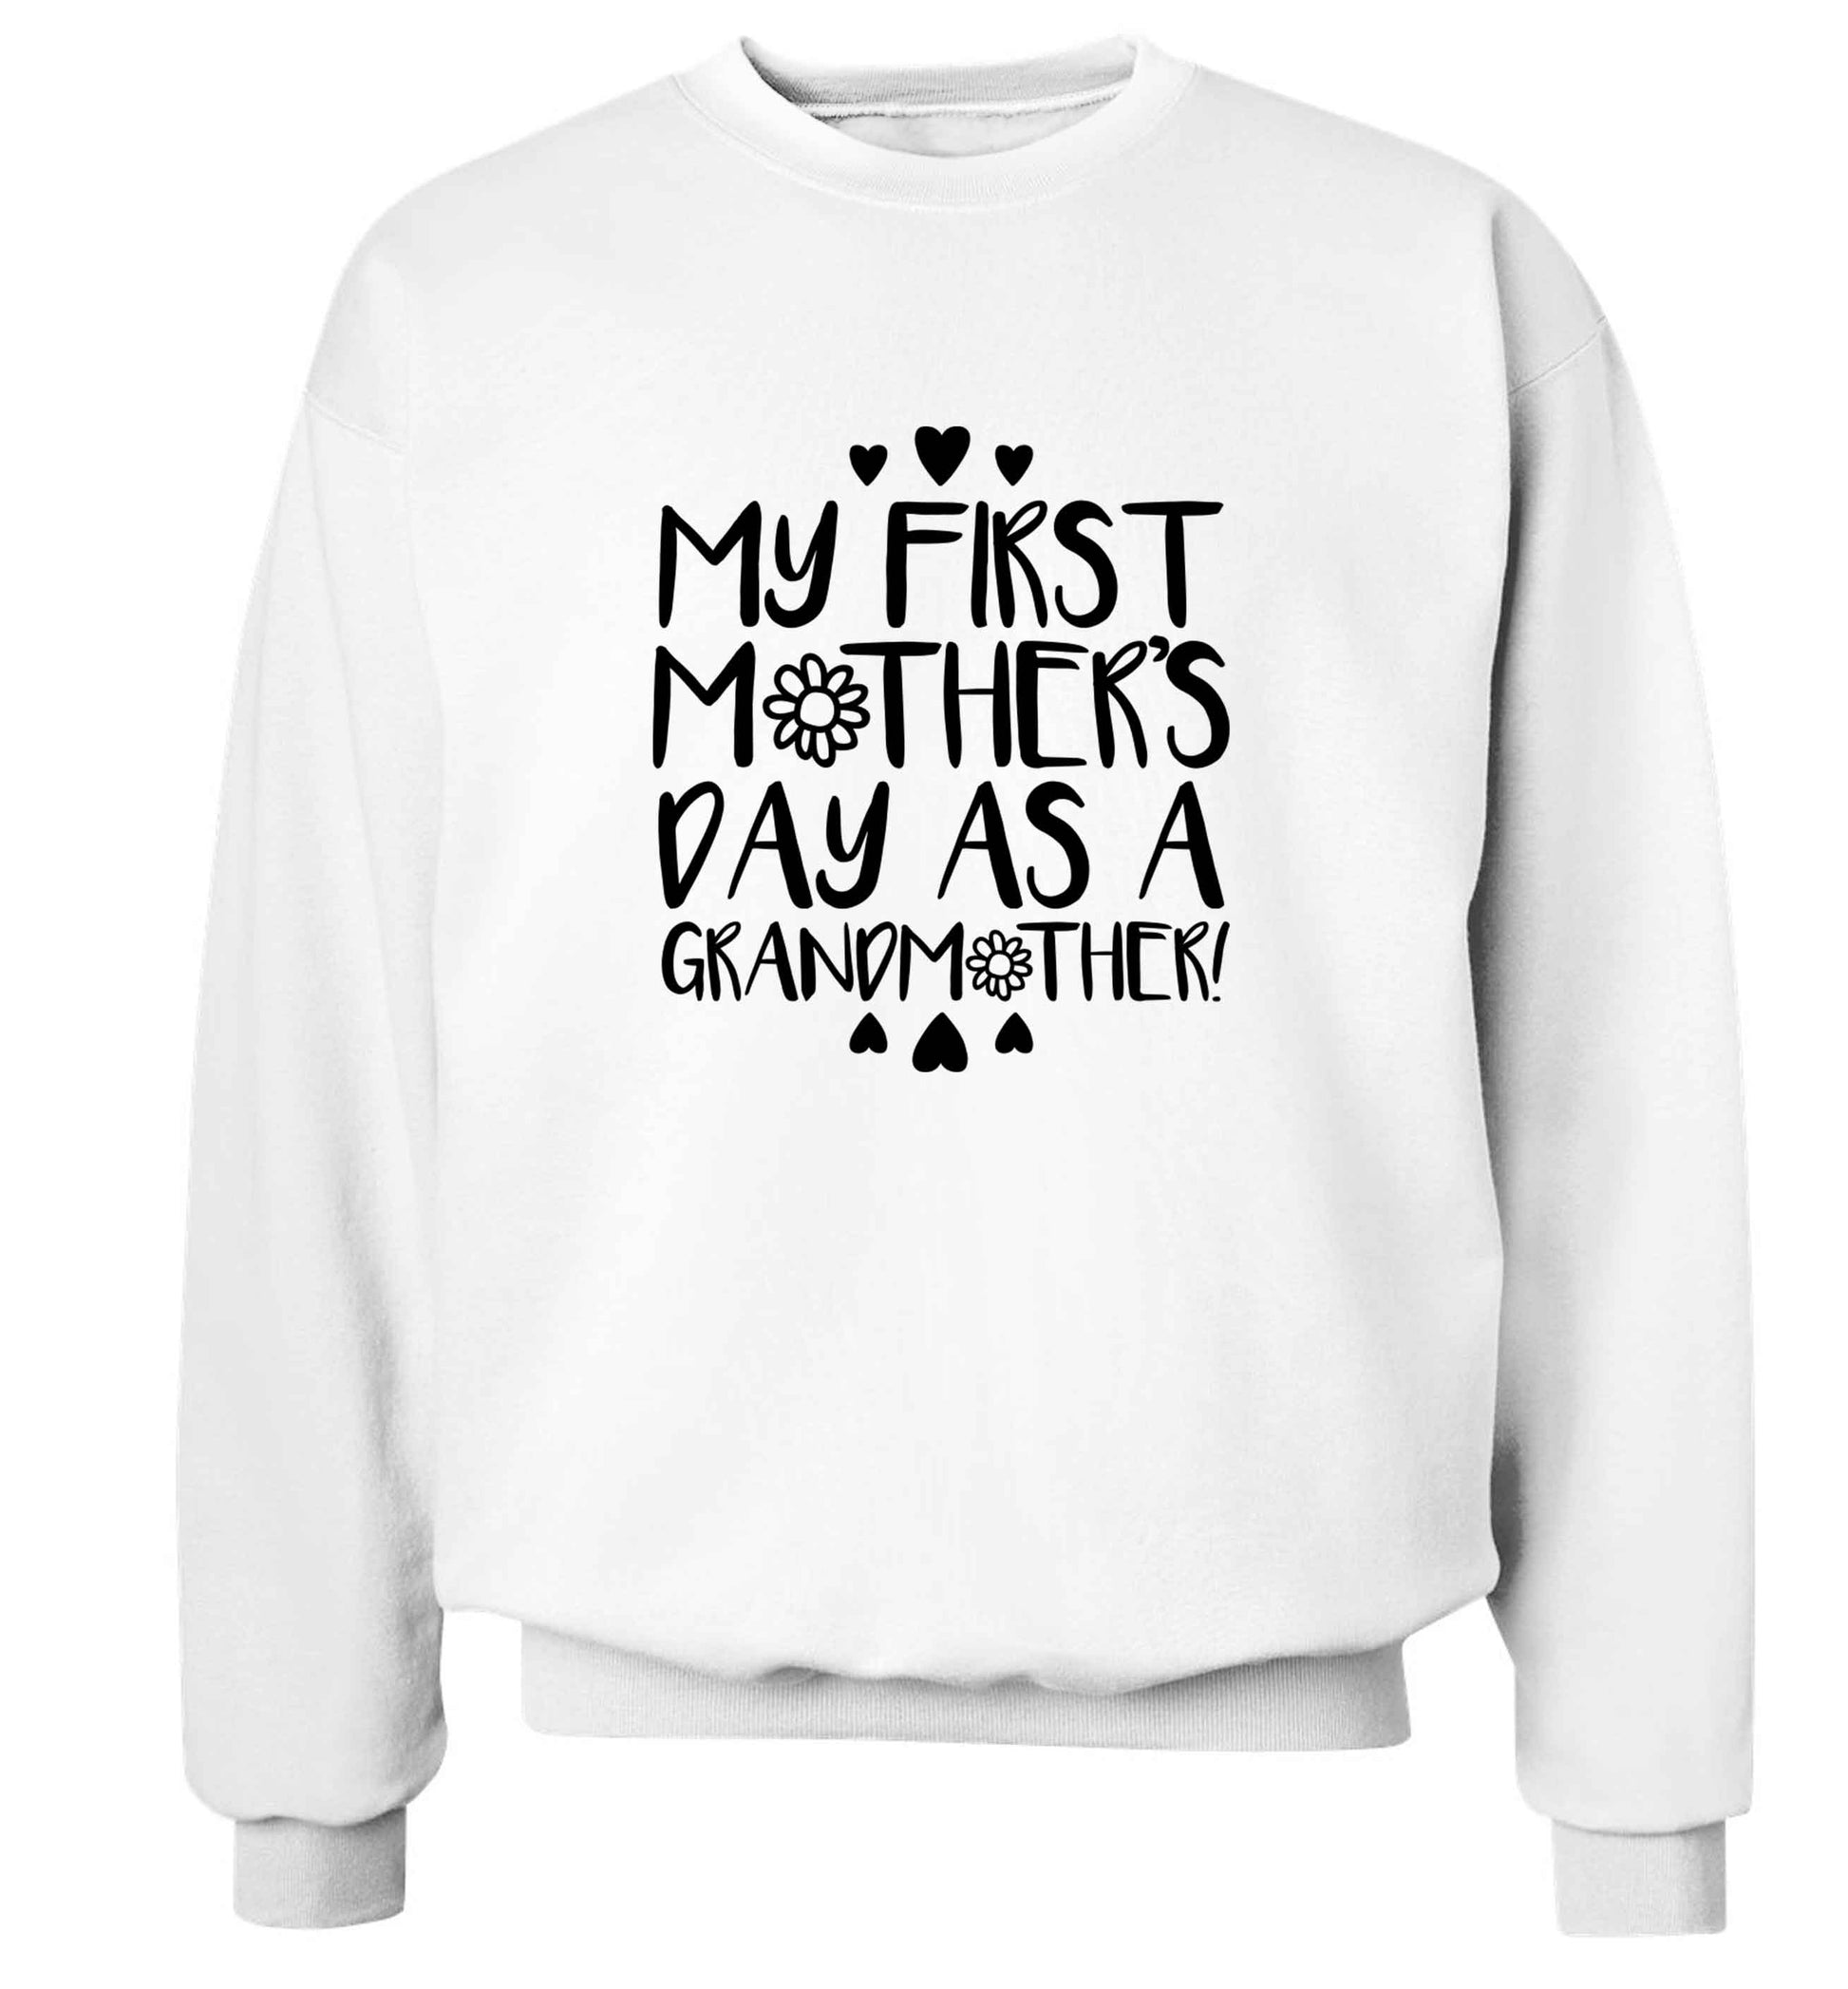 It's my first mother's day as a grandmother adult's unisex white sweater 2XL